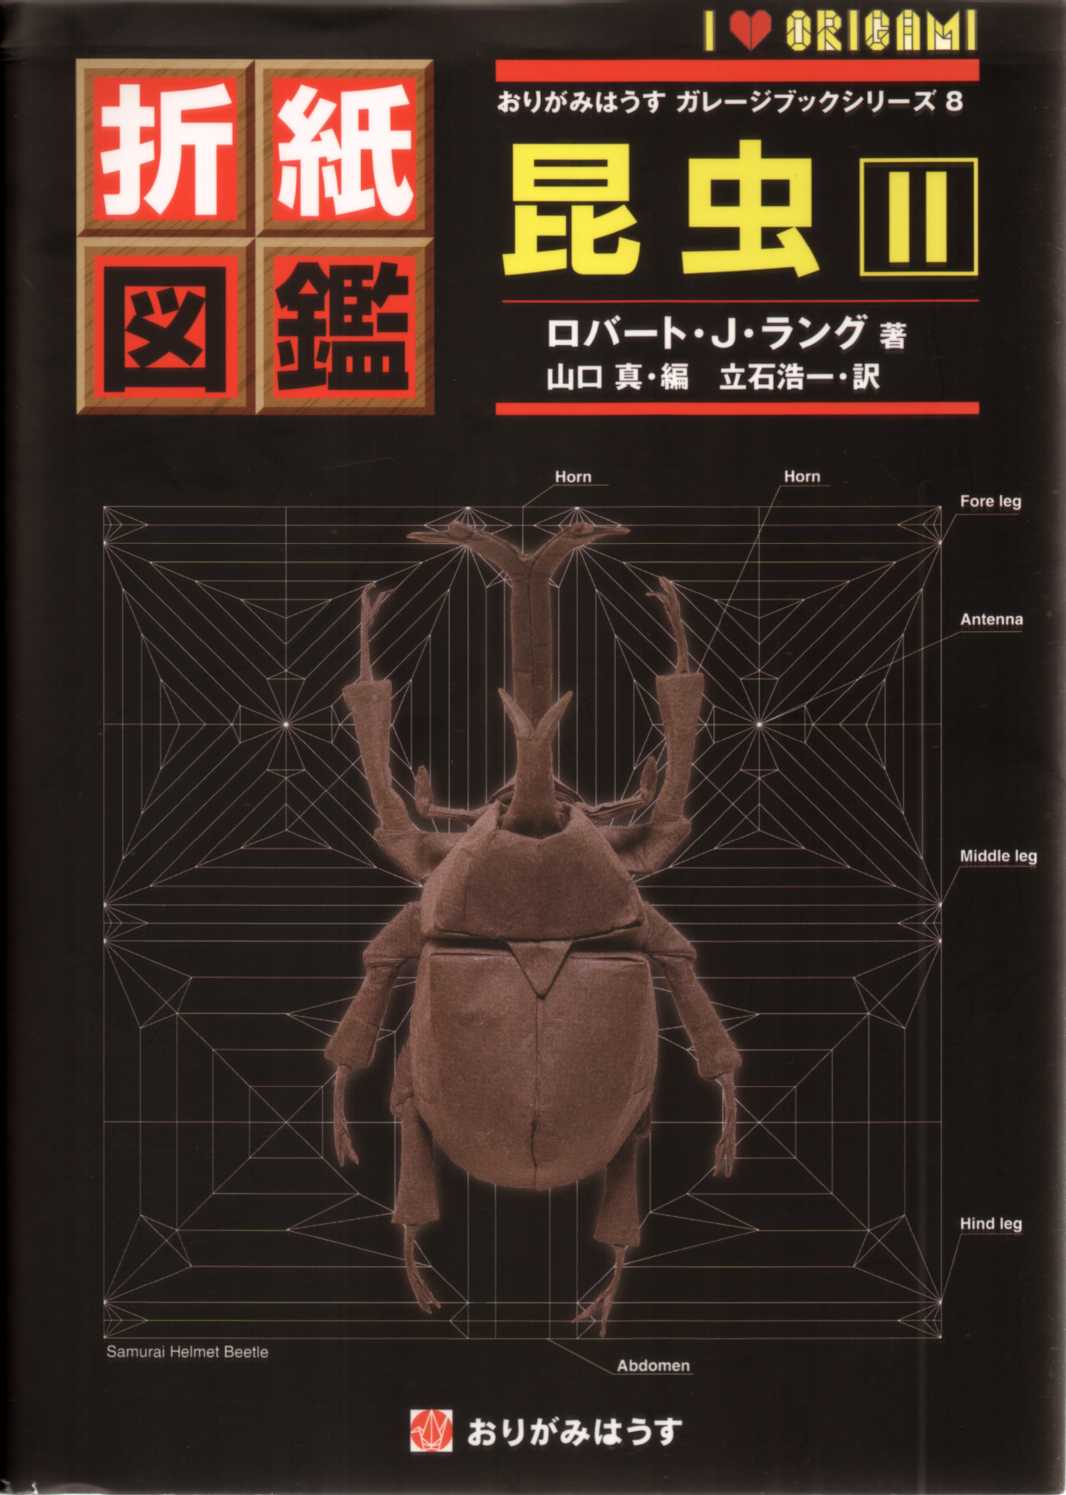 Origami Insects II / 折紙図鑑　昆虫・2 : page 86.